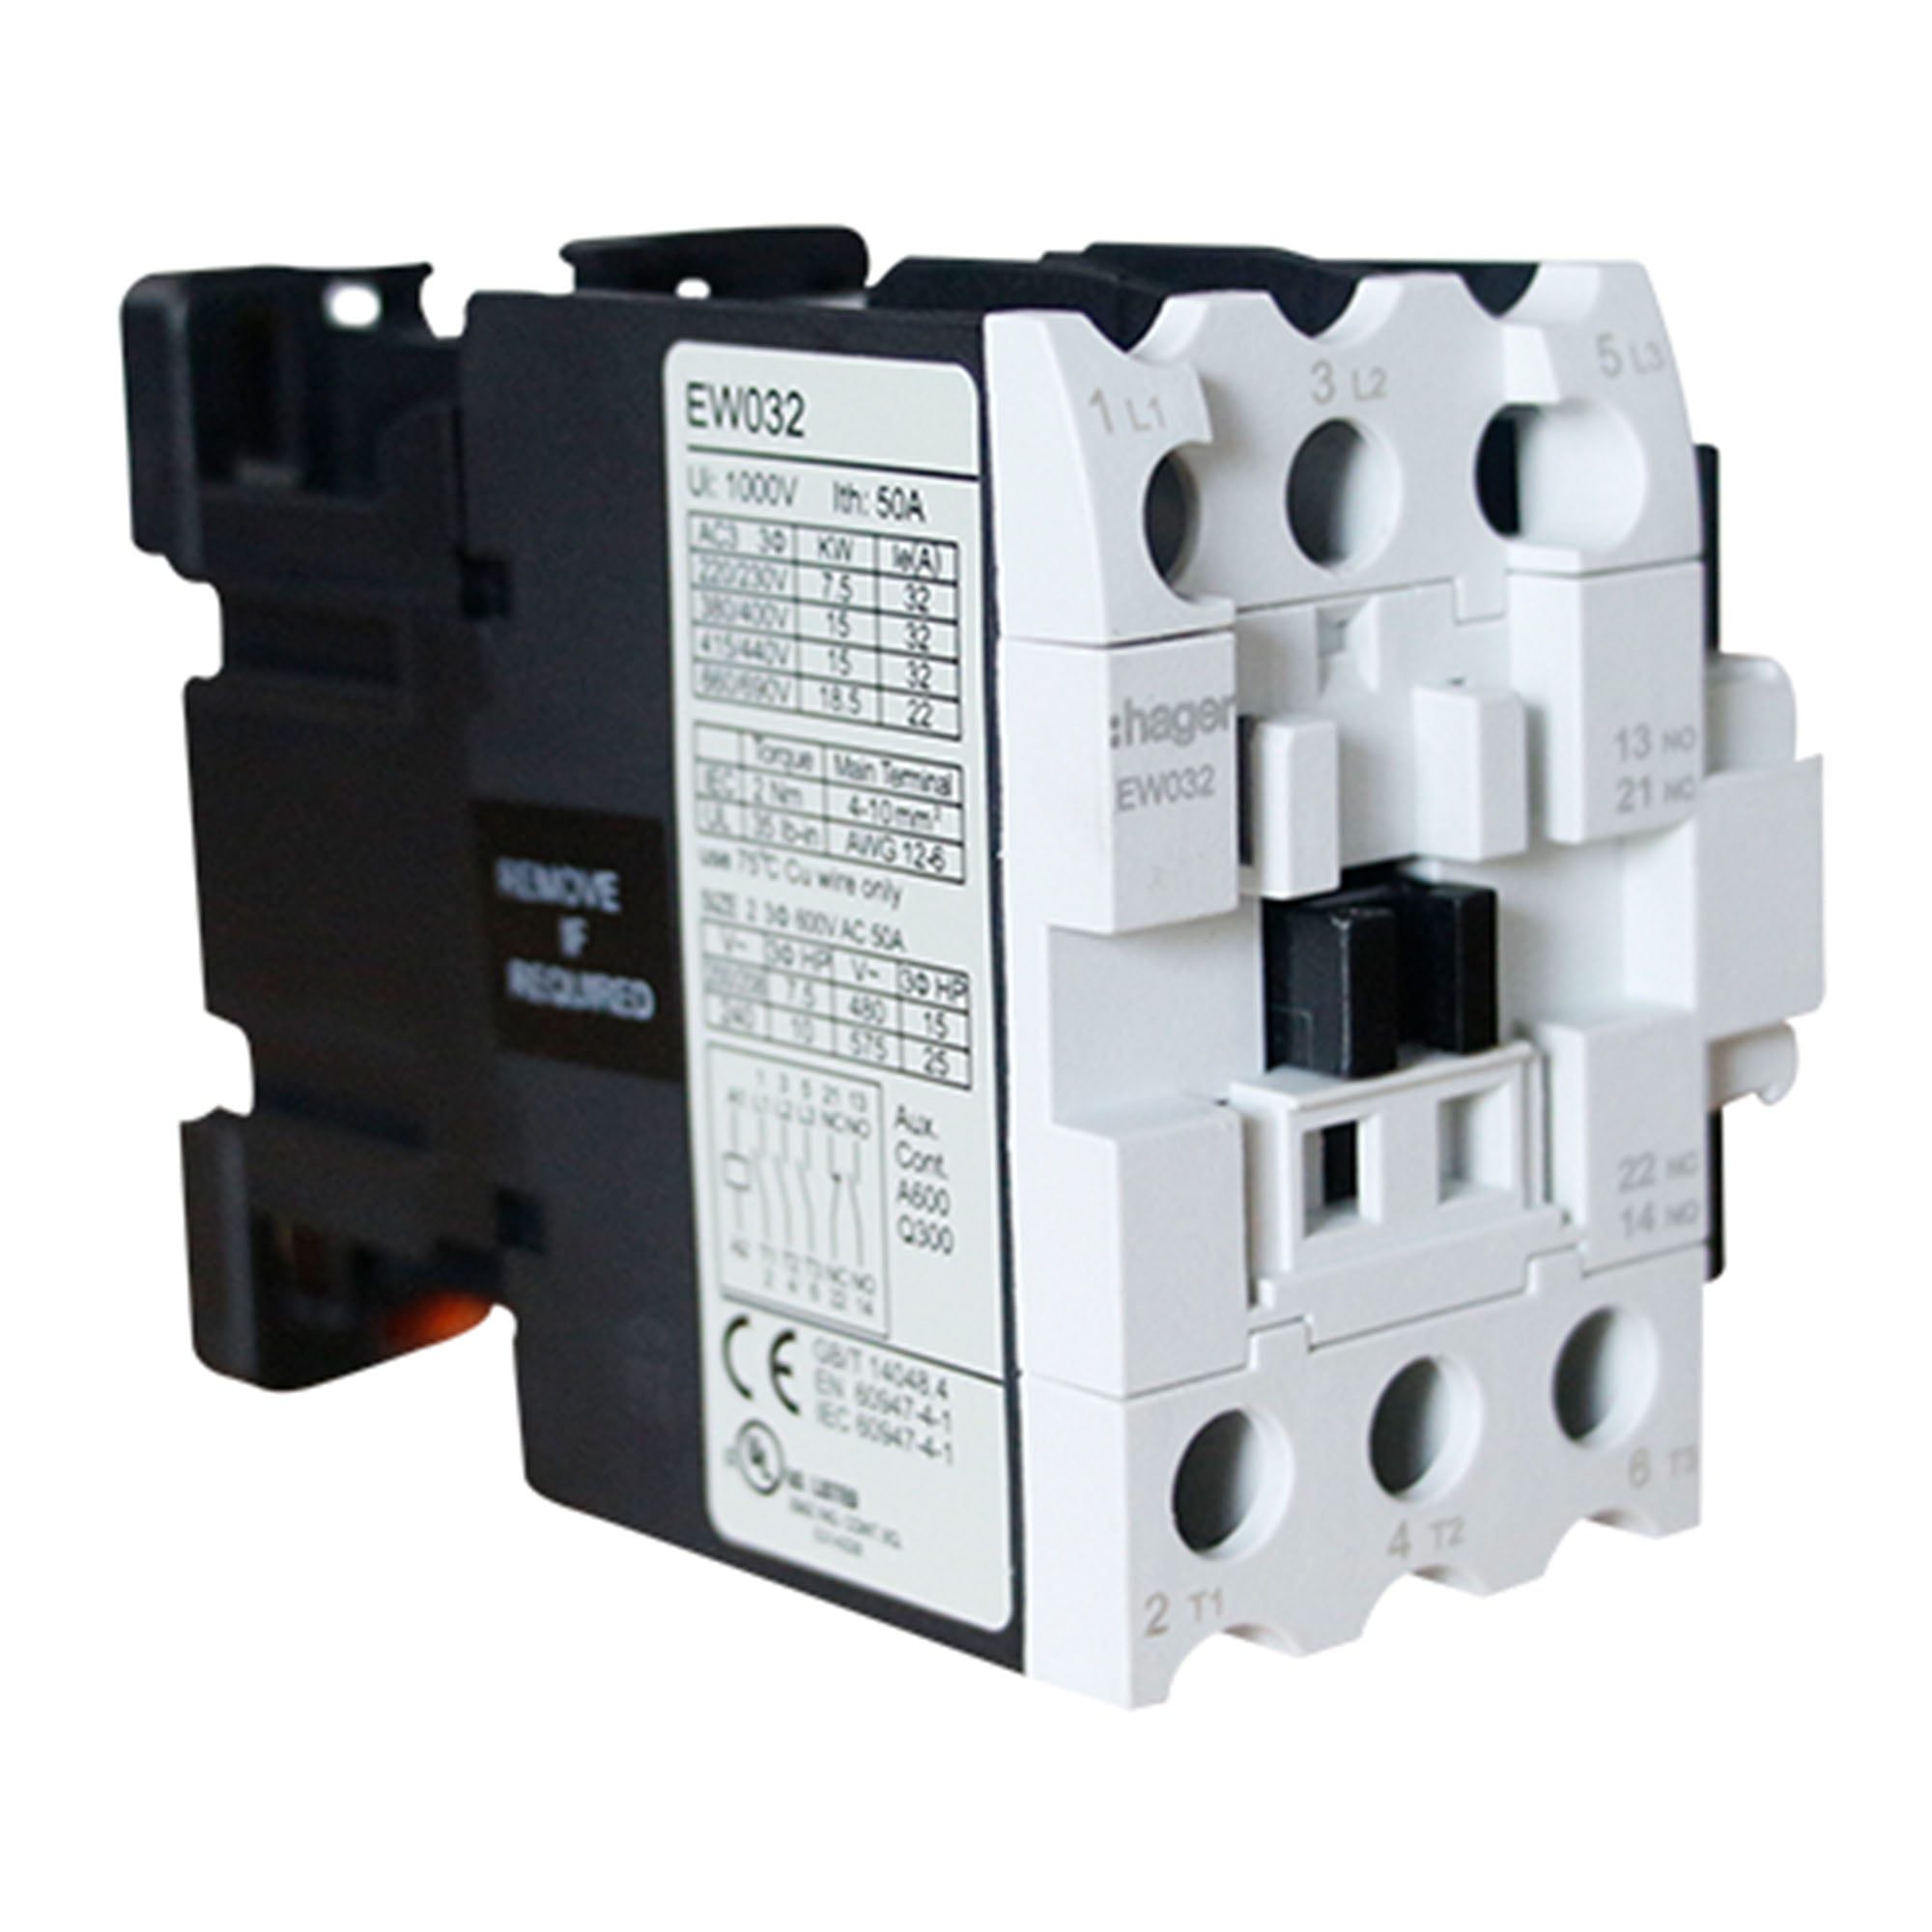 TOMA EMPOTRABLE 32AMP 2P+T 415V ROJO 9H IP44